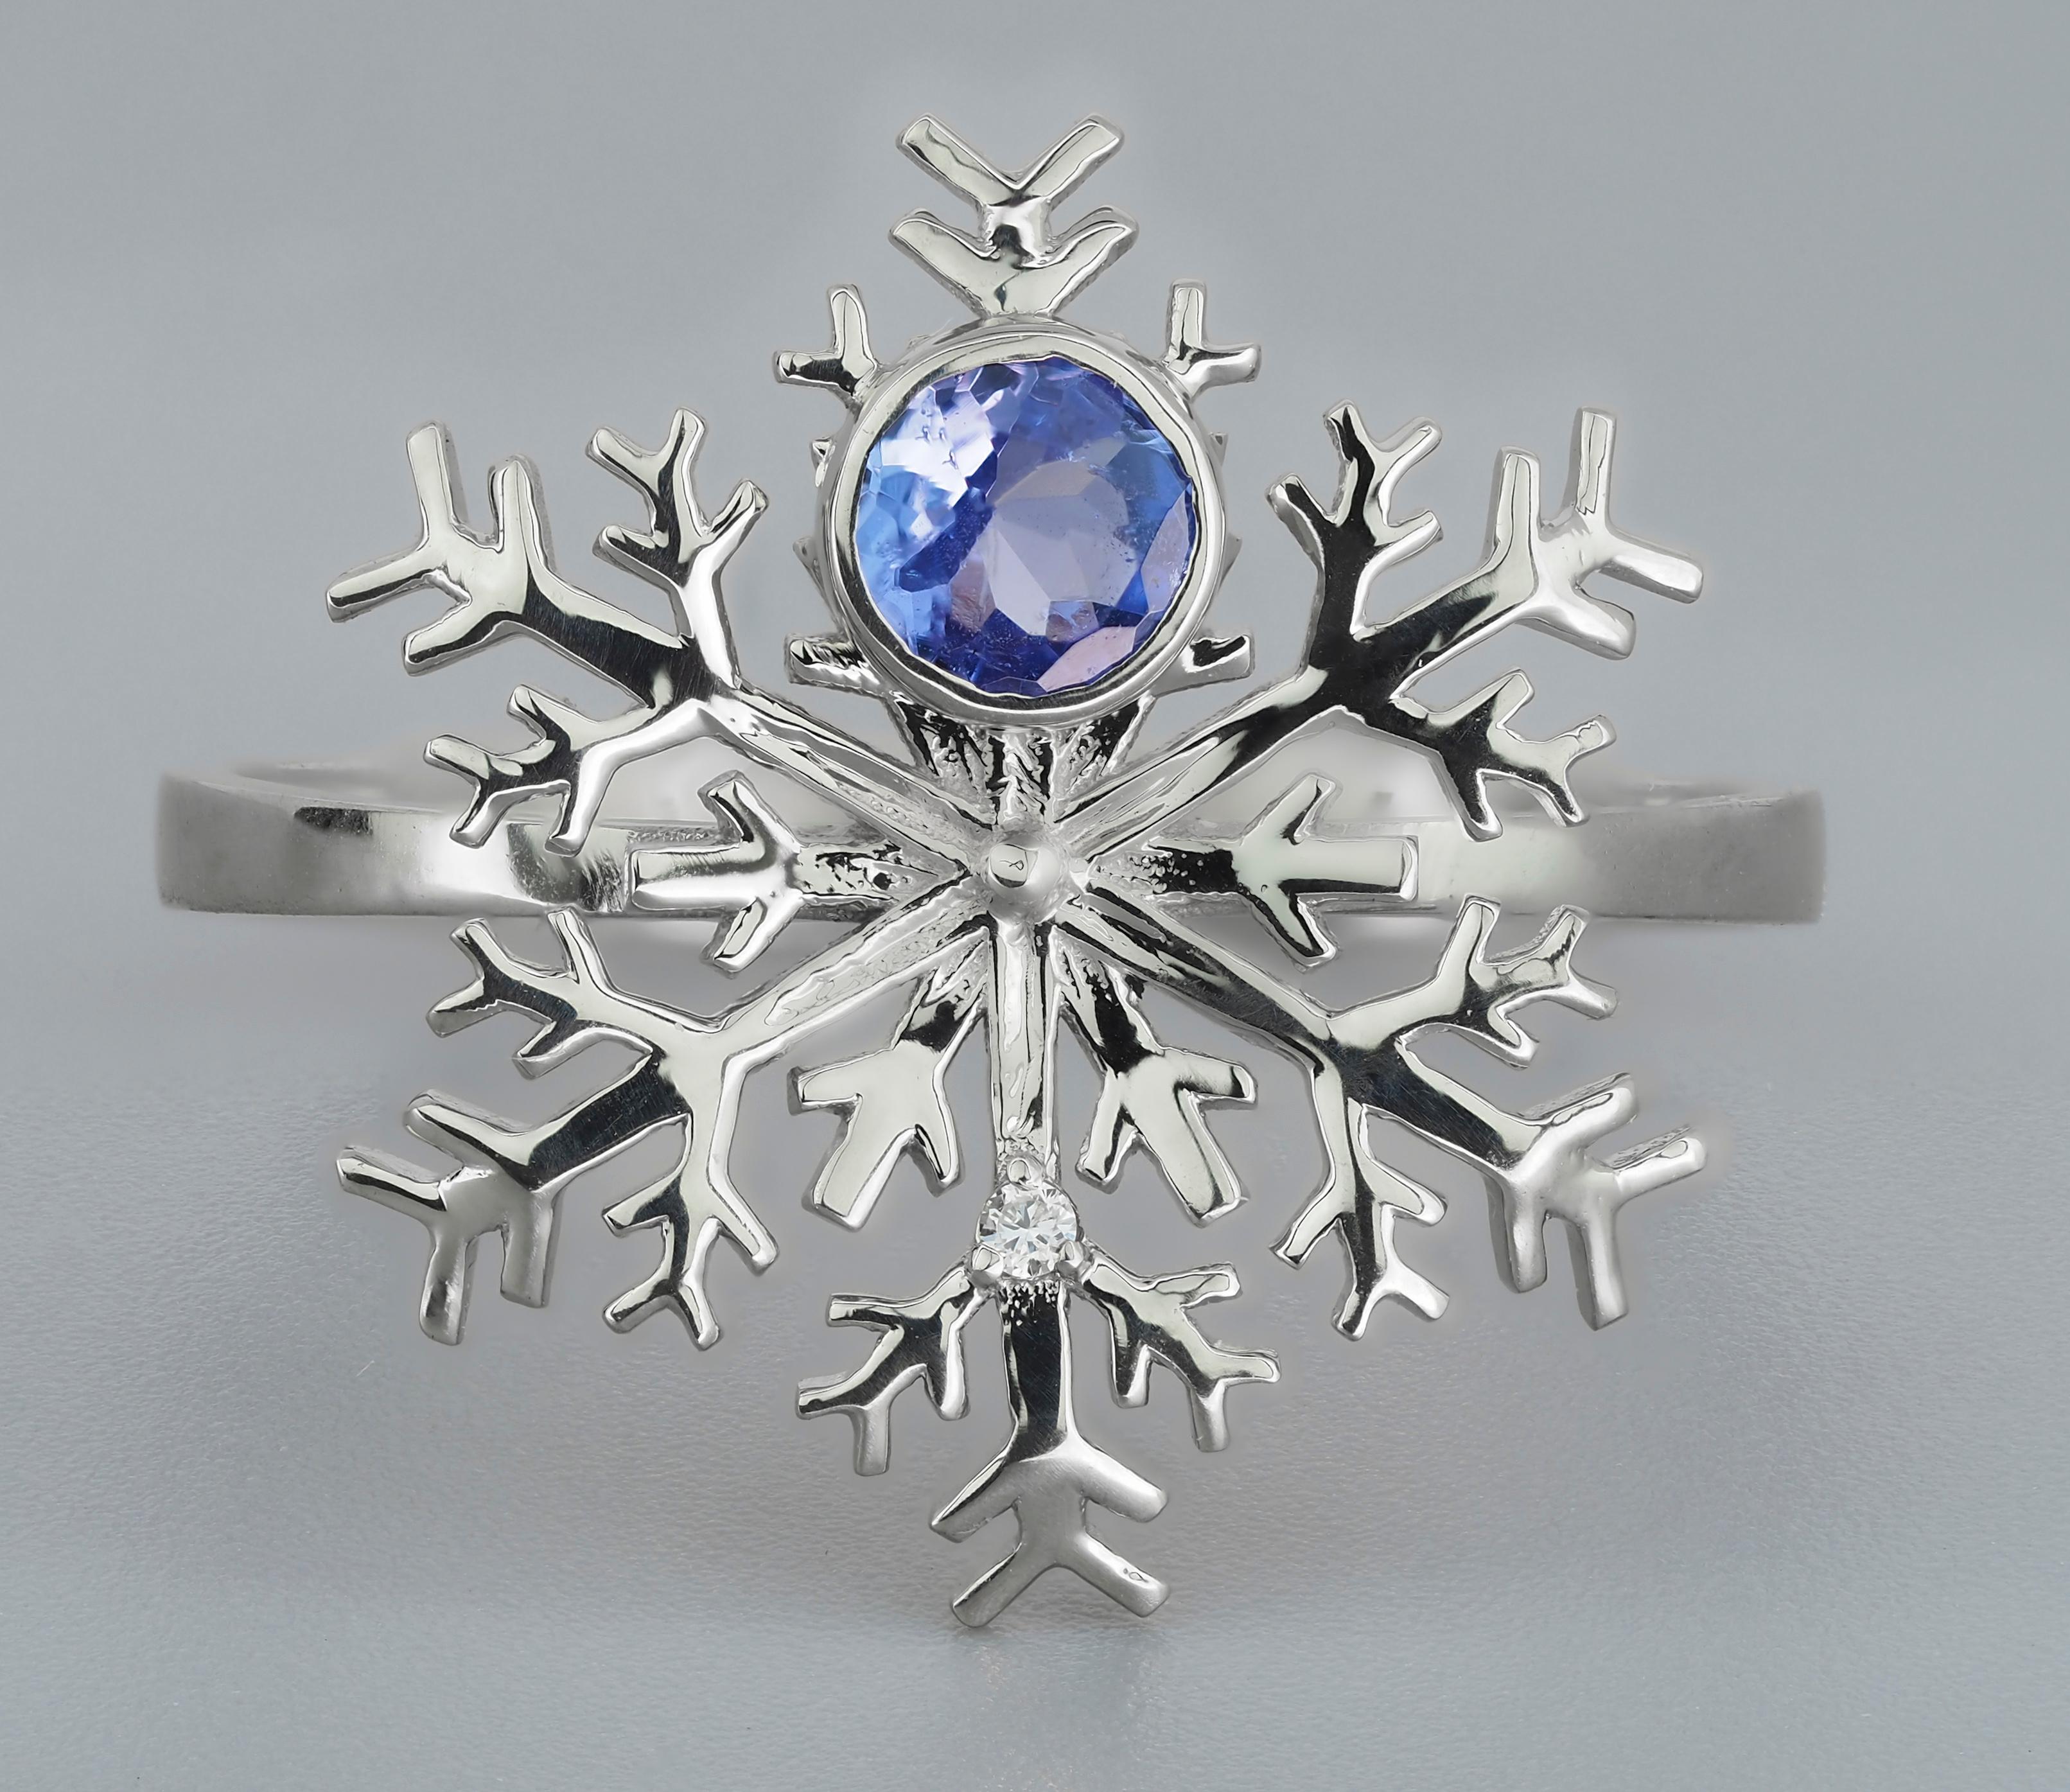 Tanzanite Snowflake gold Ring. 
Round tanzanite 14k gold ring. Christmas gift gold ring. December birthstone ring. Delicate Tanzanite ring.

Metal: 14k gold
Weight: 1.85 g. depends from size.

Set with tanzanite, color - light blue
Round cut, approx